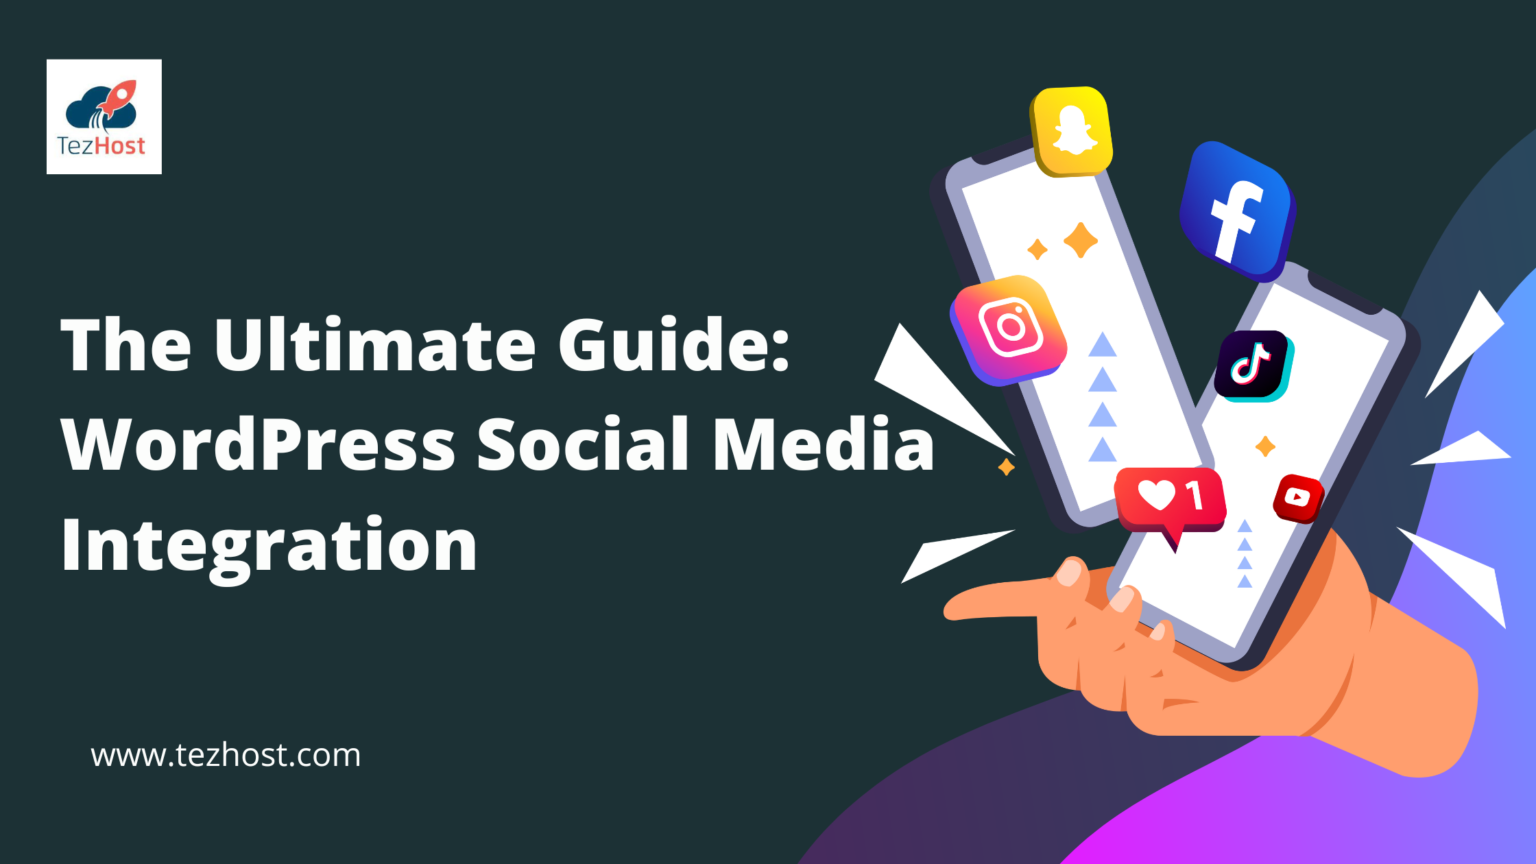 The Ultimate Guide to WordPress Social Media Integration